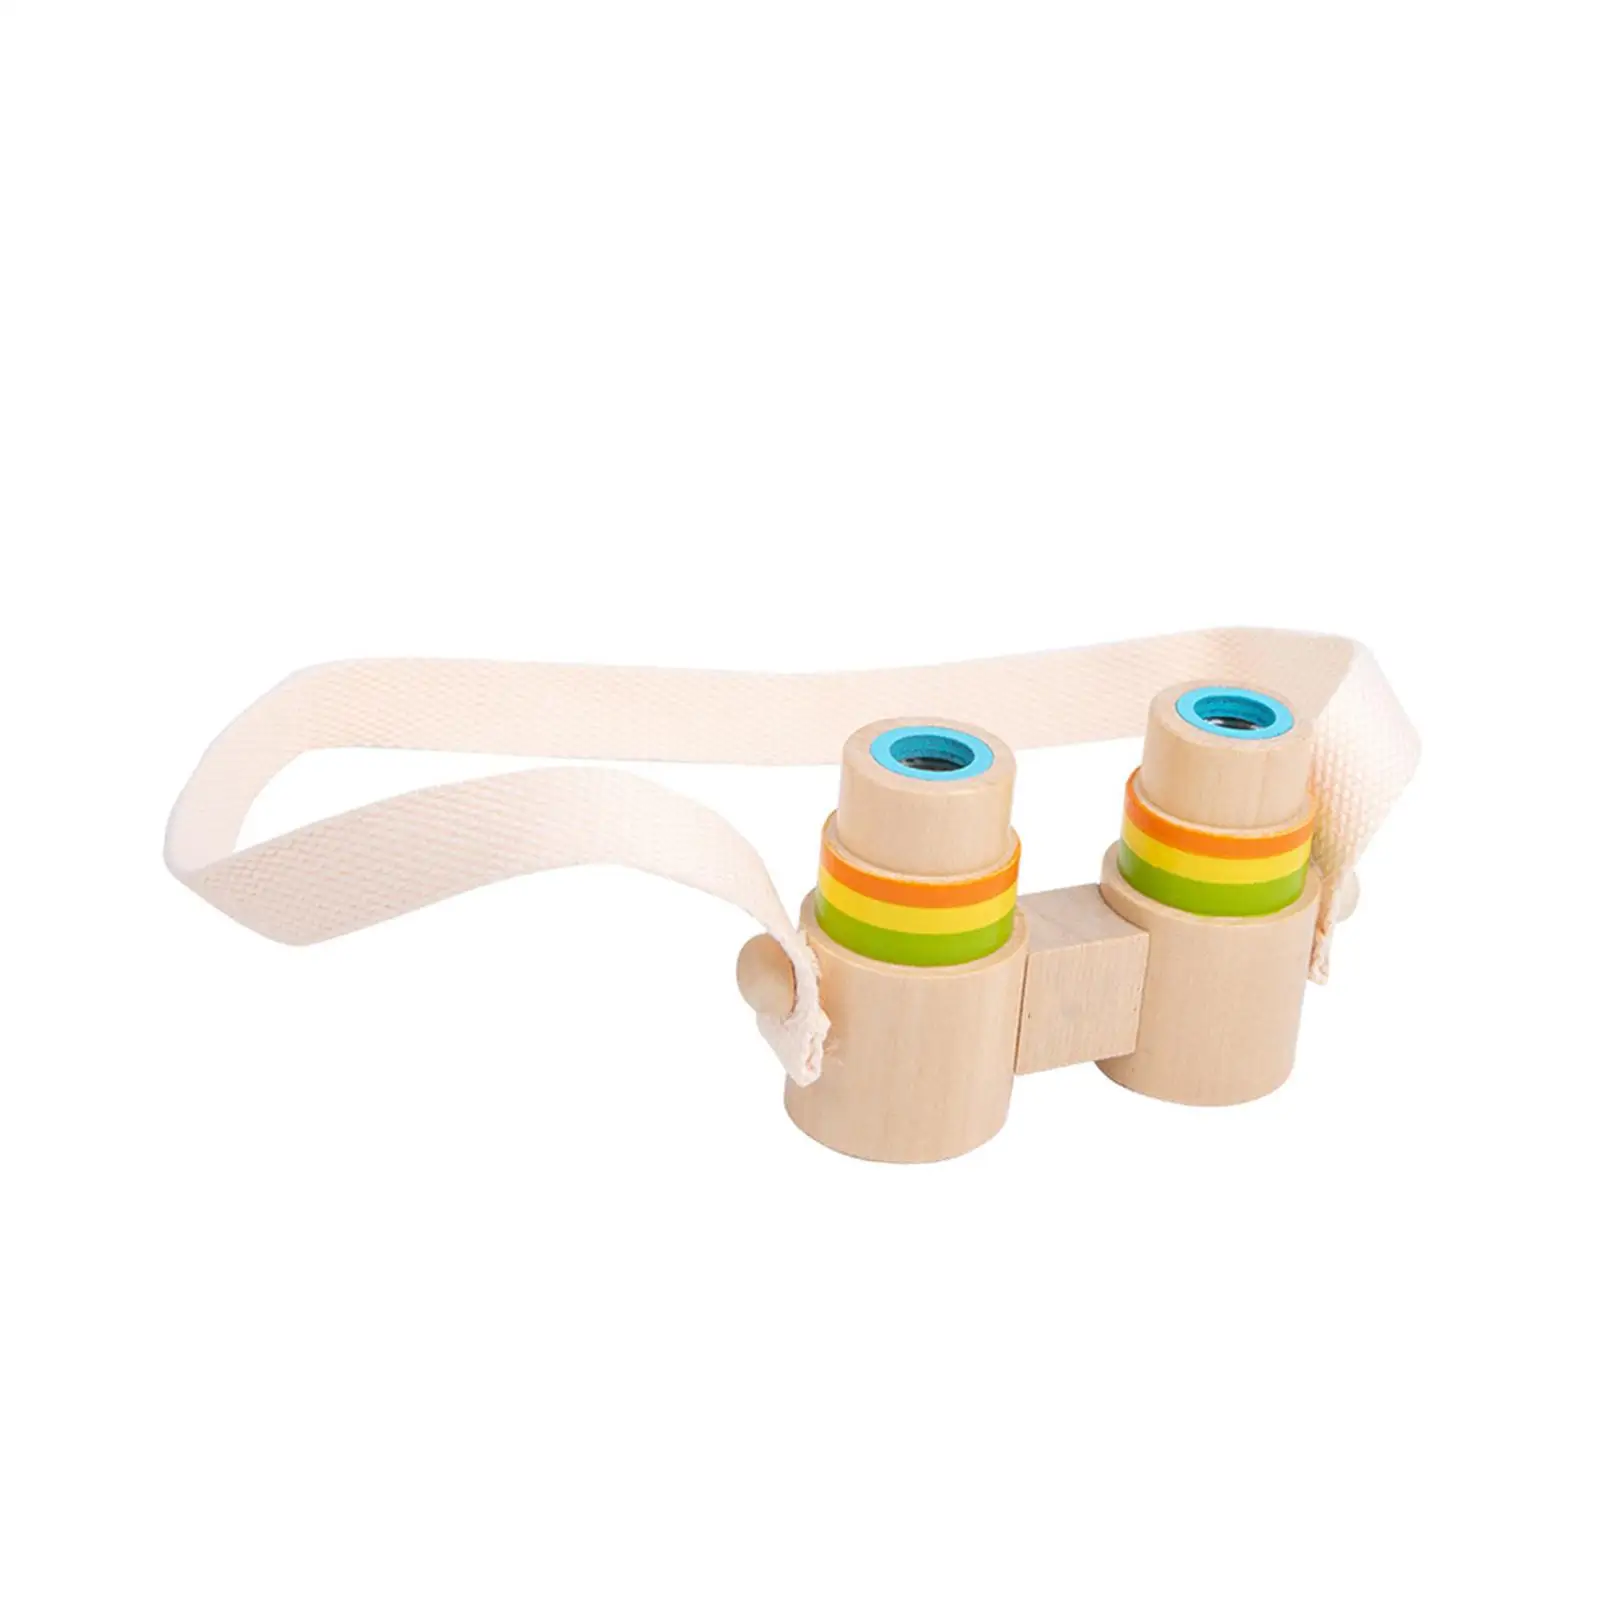 Children Magnification Toys with Magnifying Glass Wooden Pretend Plays Toy for Baby Toddlers Sports Events